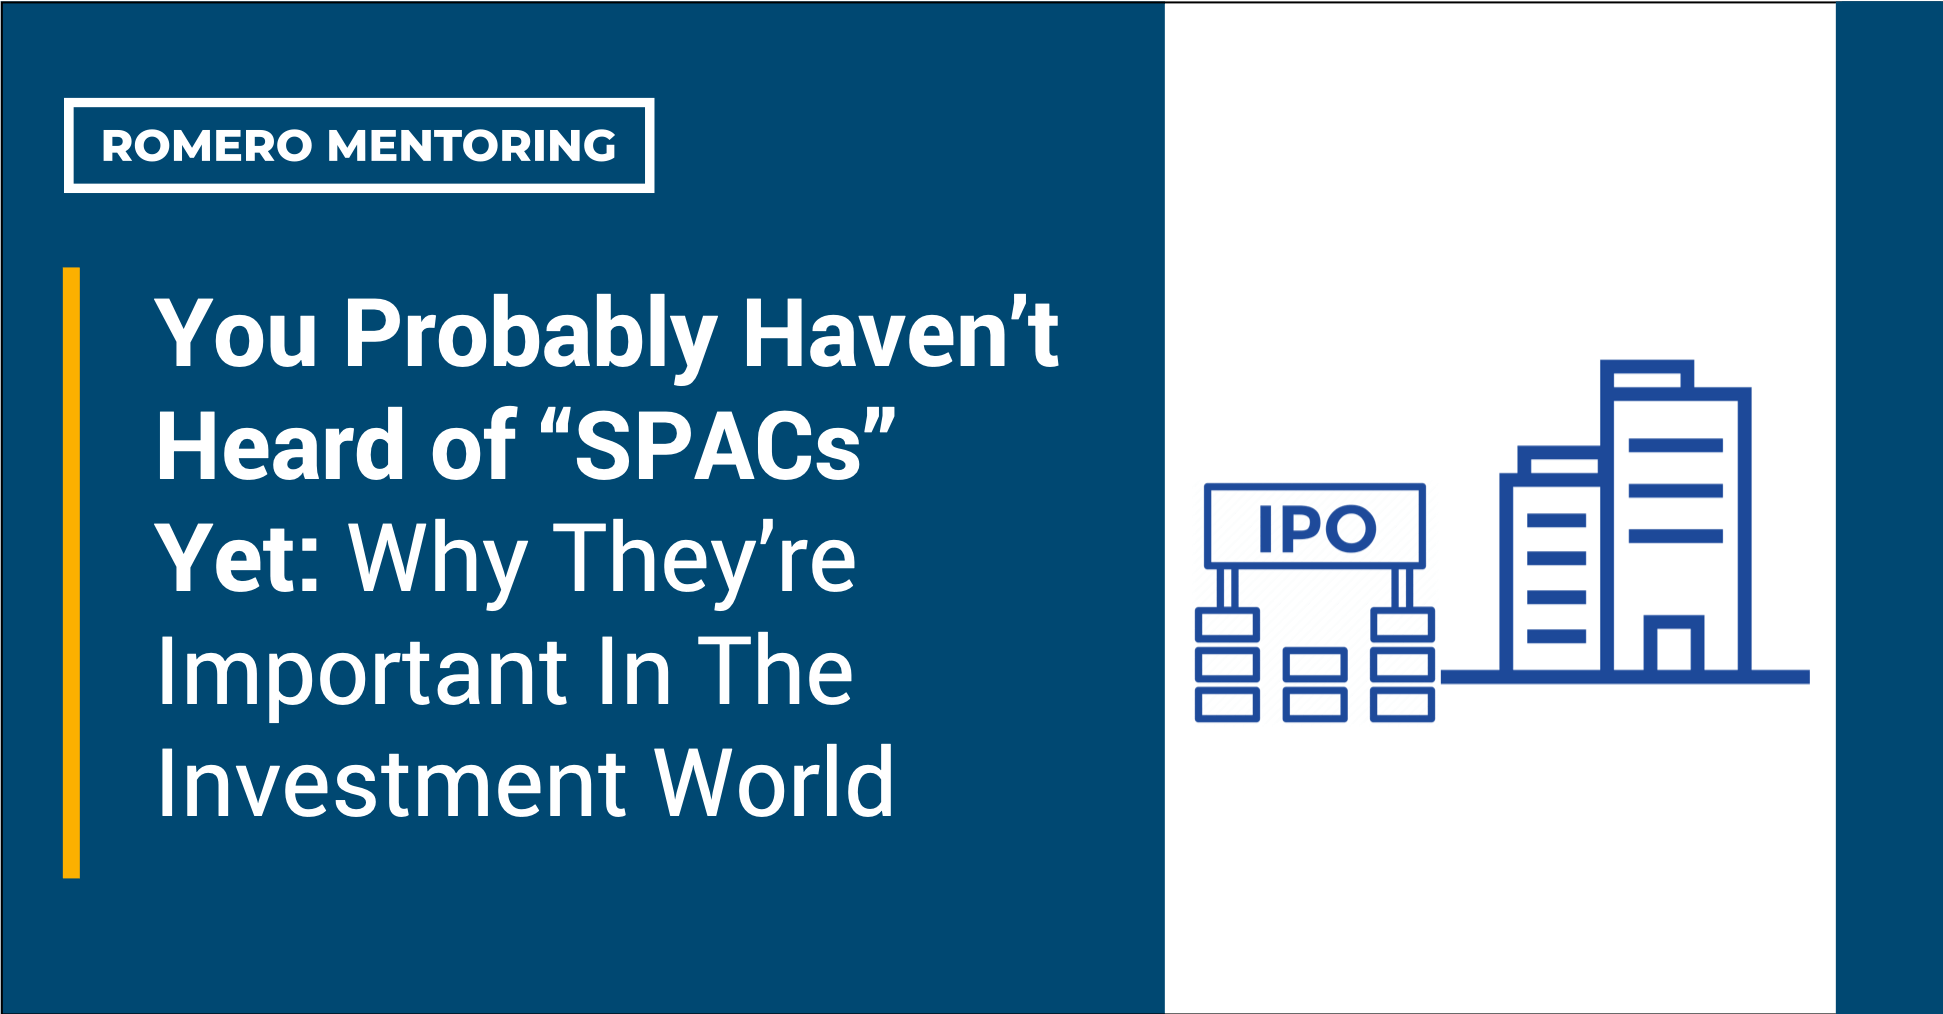 You Probably Haven’t Heard of “SPACs” Yet: Why T hey’re Important In The Investment World